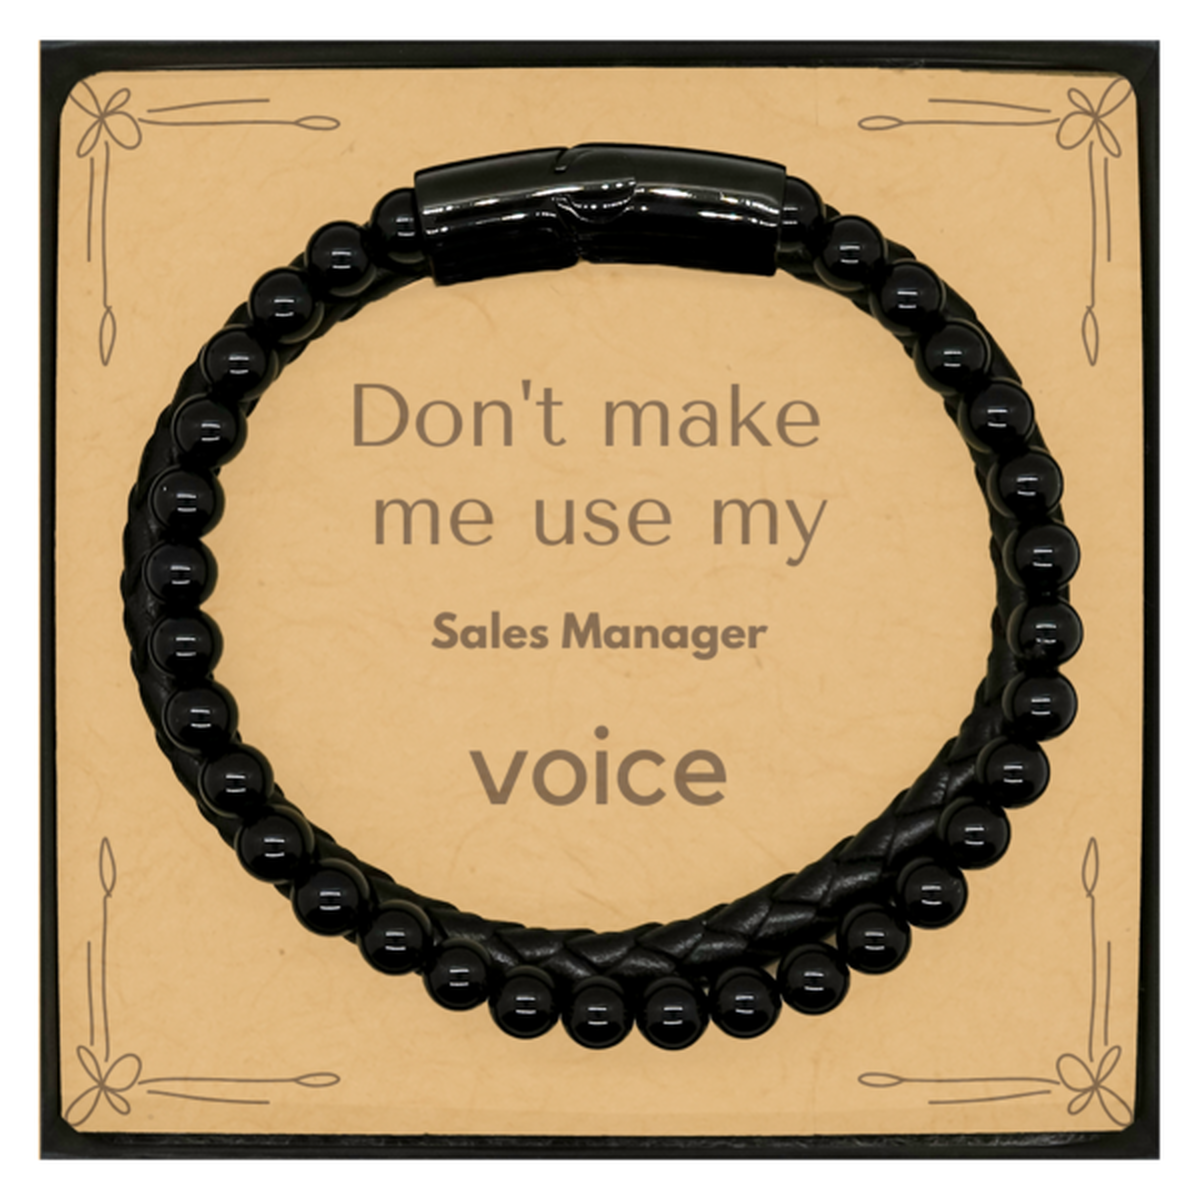 Don't make me use my Sales Manager voice, Sarcasm Sales Manager Card Gifts, Christmas Sales Manager Stone Leather Bracelets Birthday Unique Gifts For Sales Manager Coworkers, Men, Women, Colleague, Friends